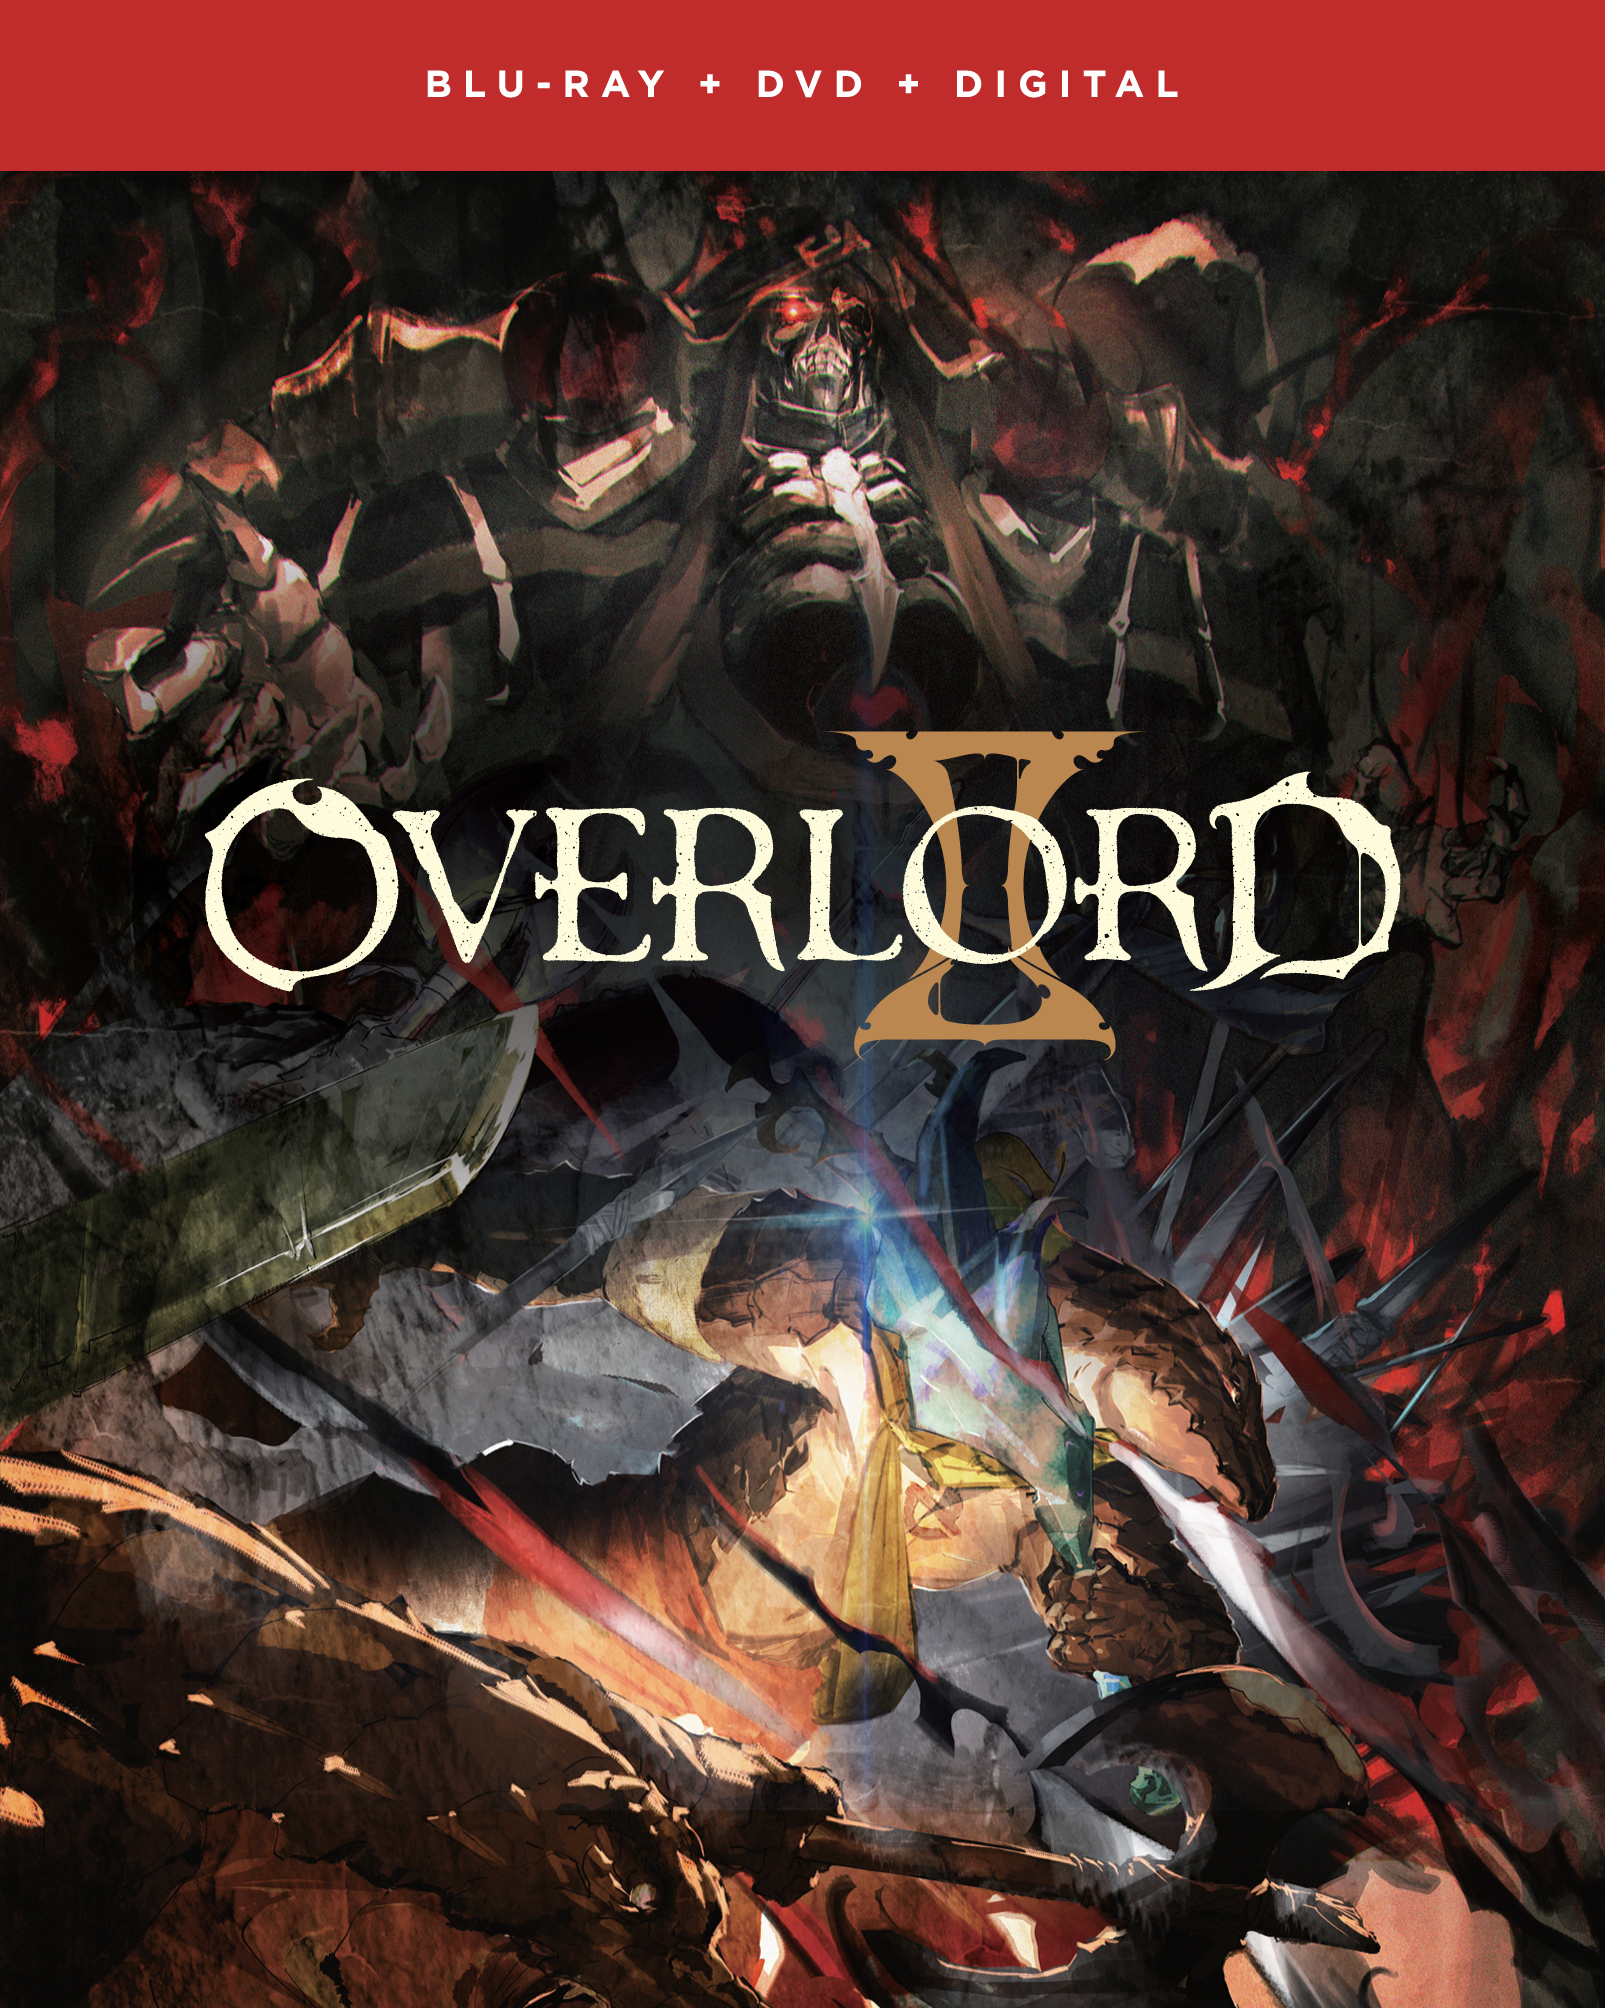 Overlord II - Pictures 